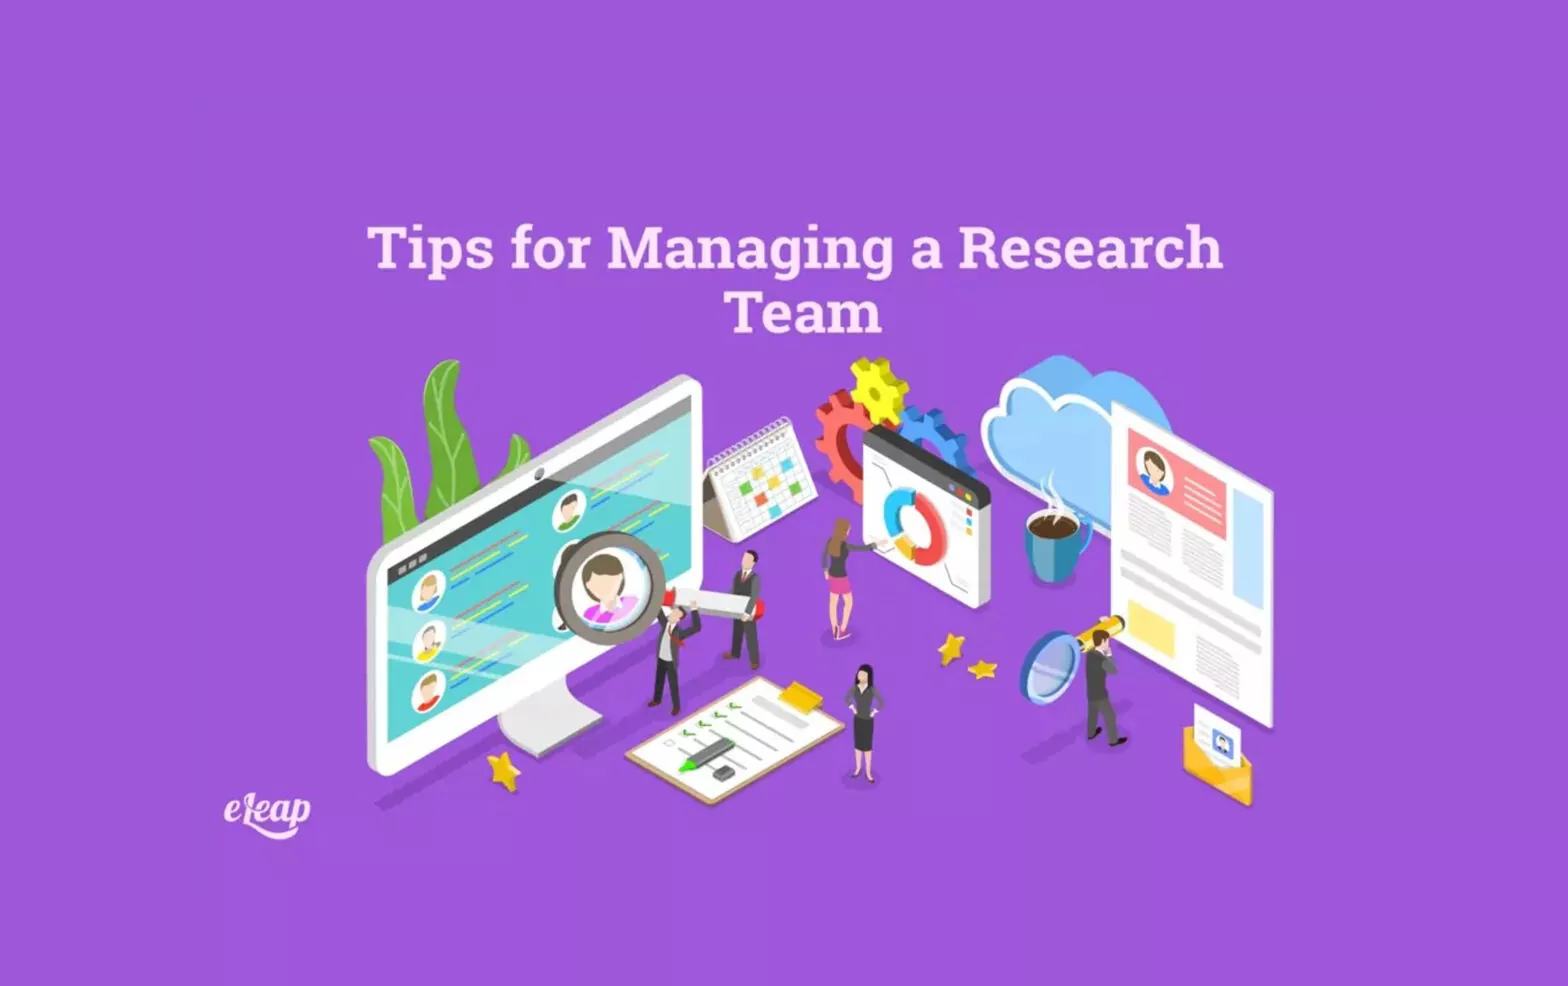 Tips for Managing a Research Team